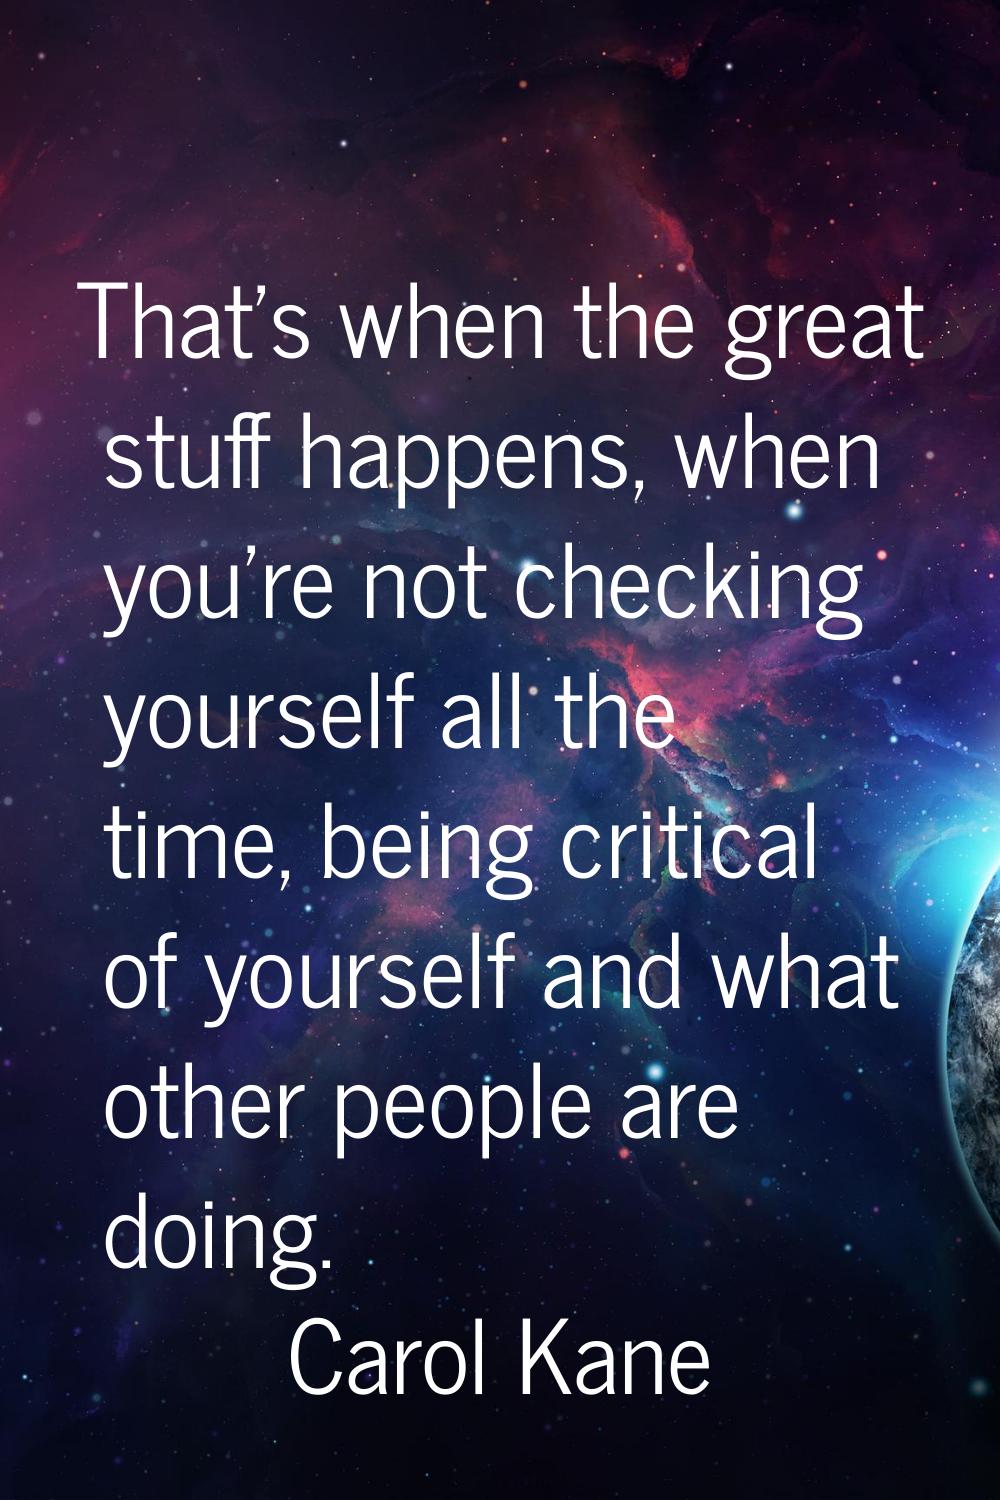 That's when the great stuff happens, when you're not checking yourself all the time, being critical